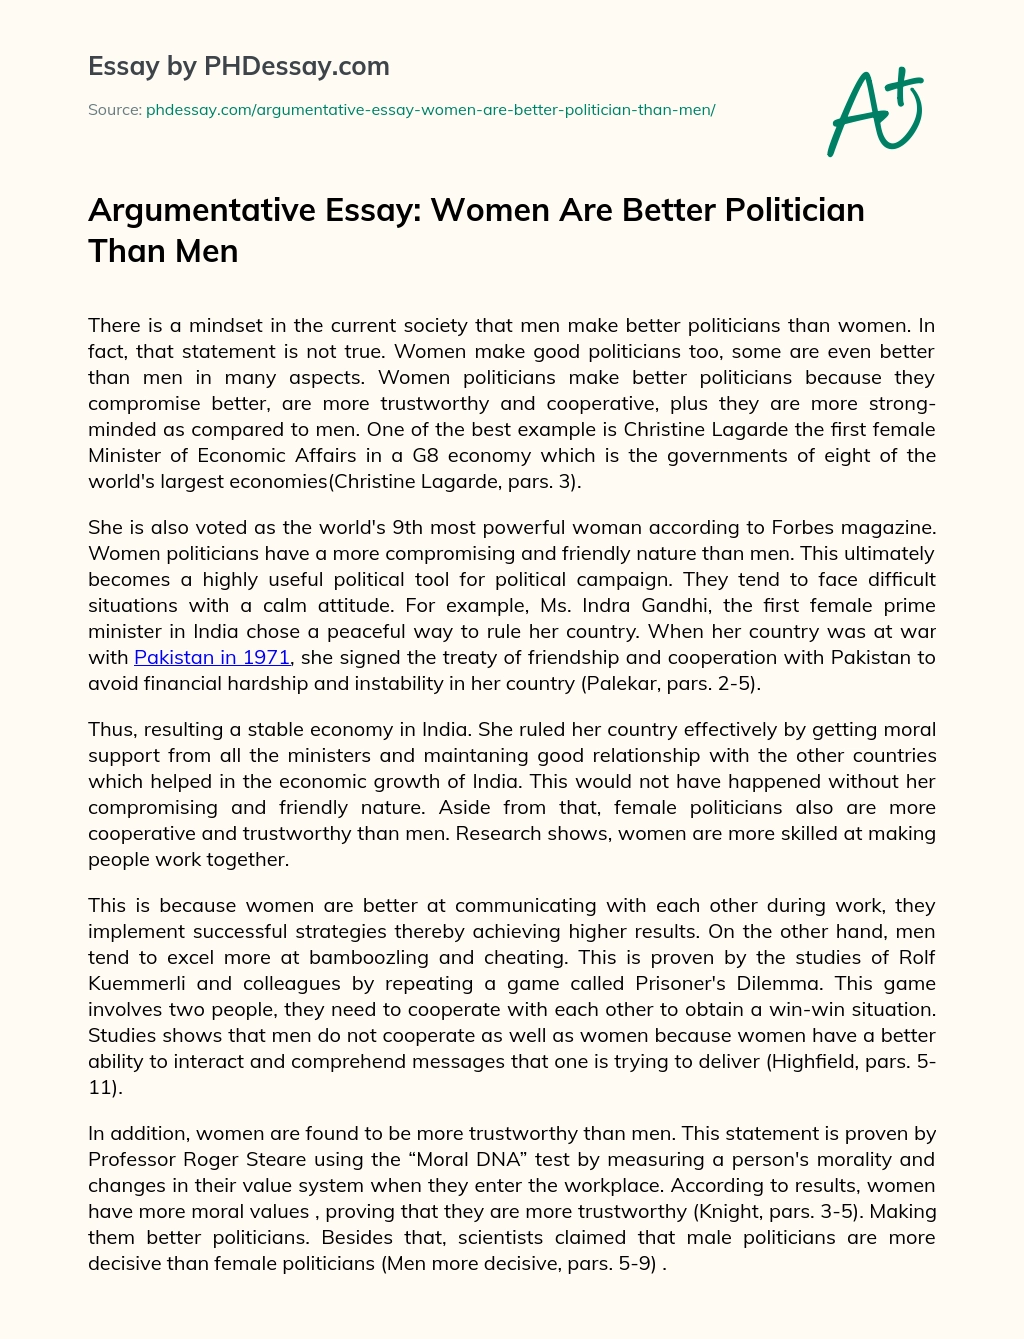 are girls too mean to each other argumentative essay